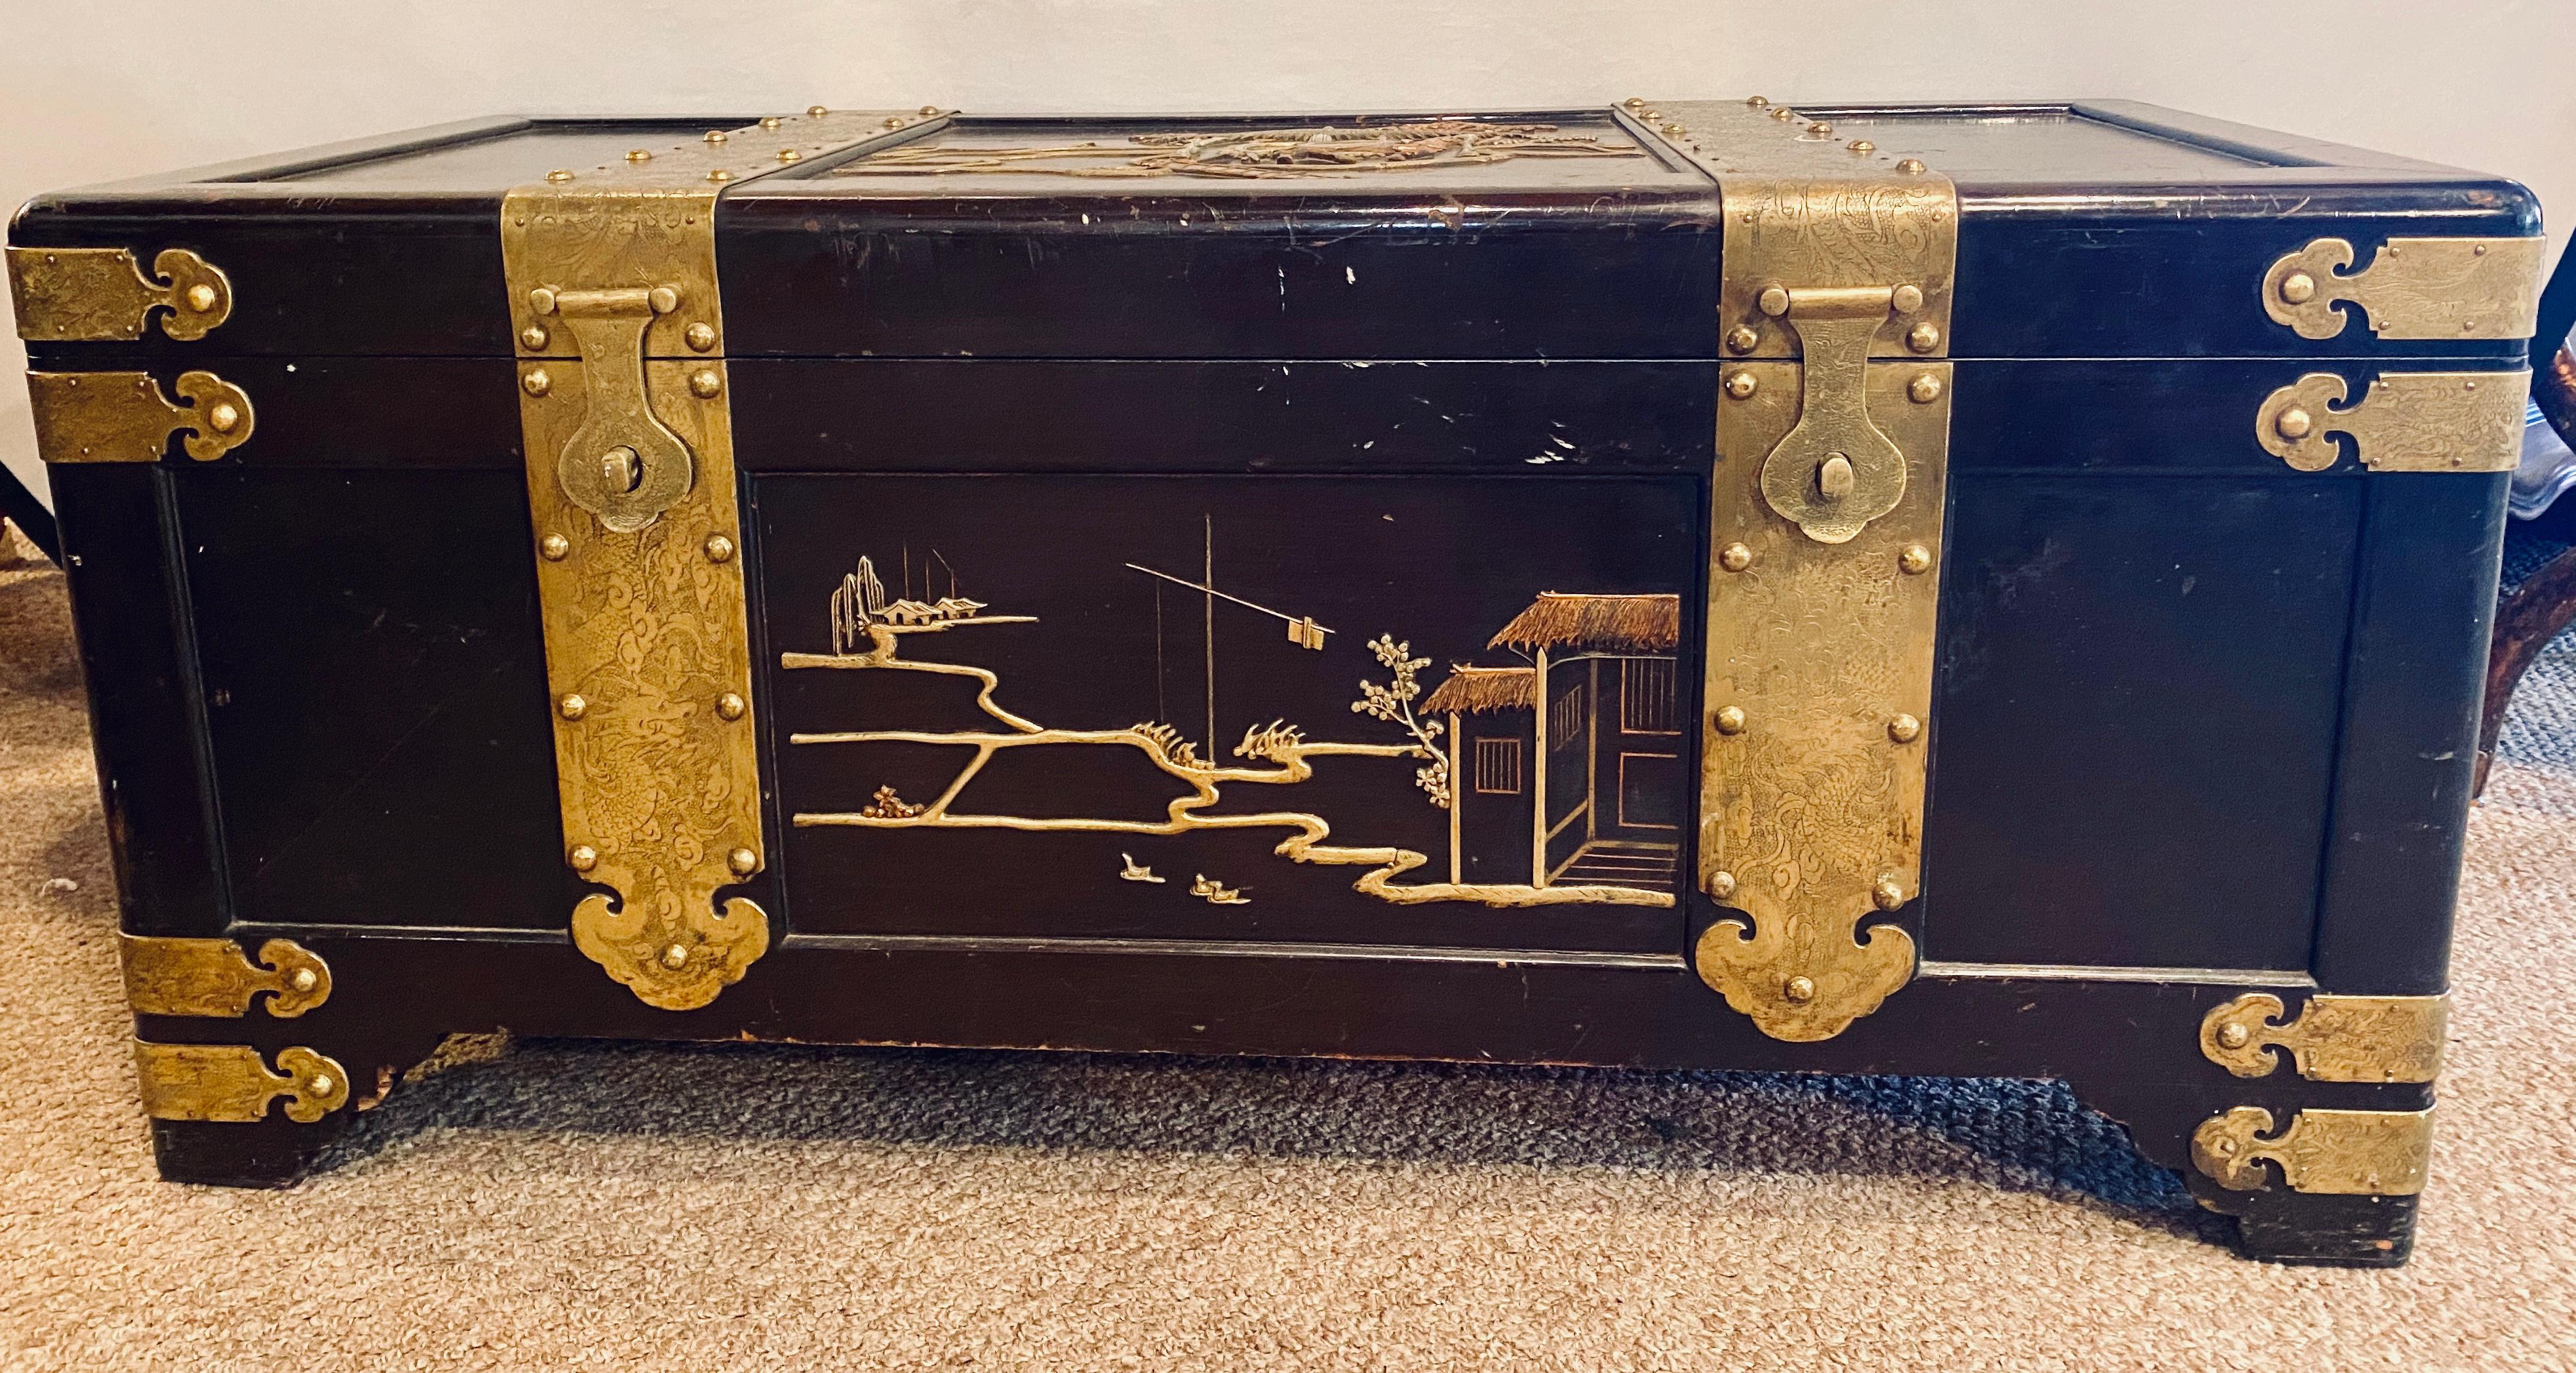 1920s Century Asian Dowry, blanket or storage chest. Bronze decorated having strong bronze hinges with a cedar interior this functional and decorative chest is simply stunning having an all over brass and copper design with camels, motifs and